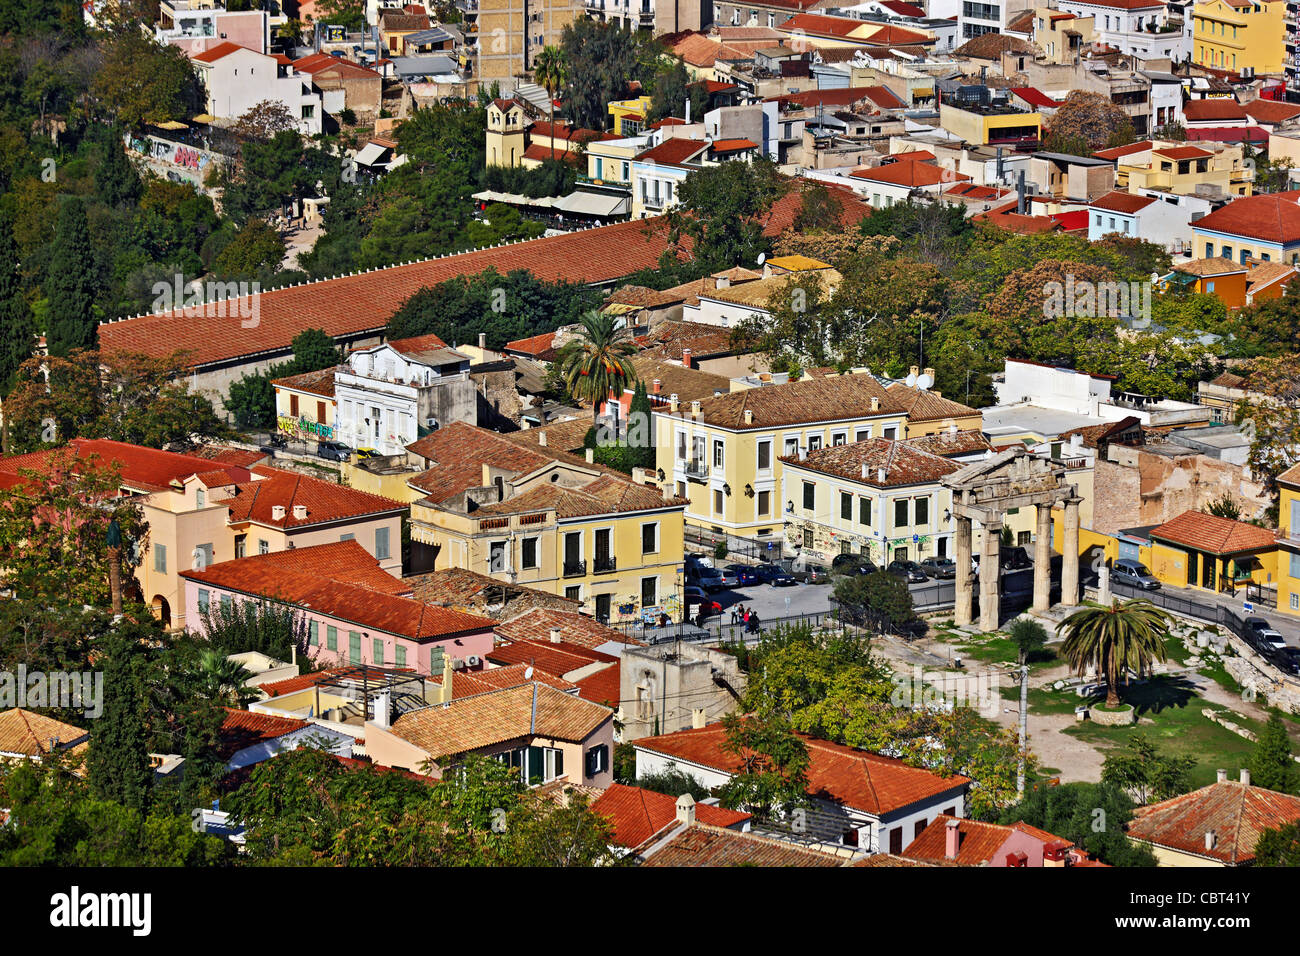 Panoramic , partial, view of Plaka neighborhood, the most picturesque of Athens city, Greece. Photo taken from the Acropolis. Stock Photo